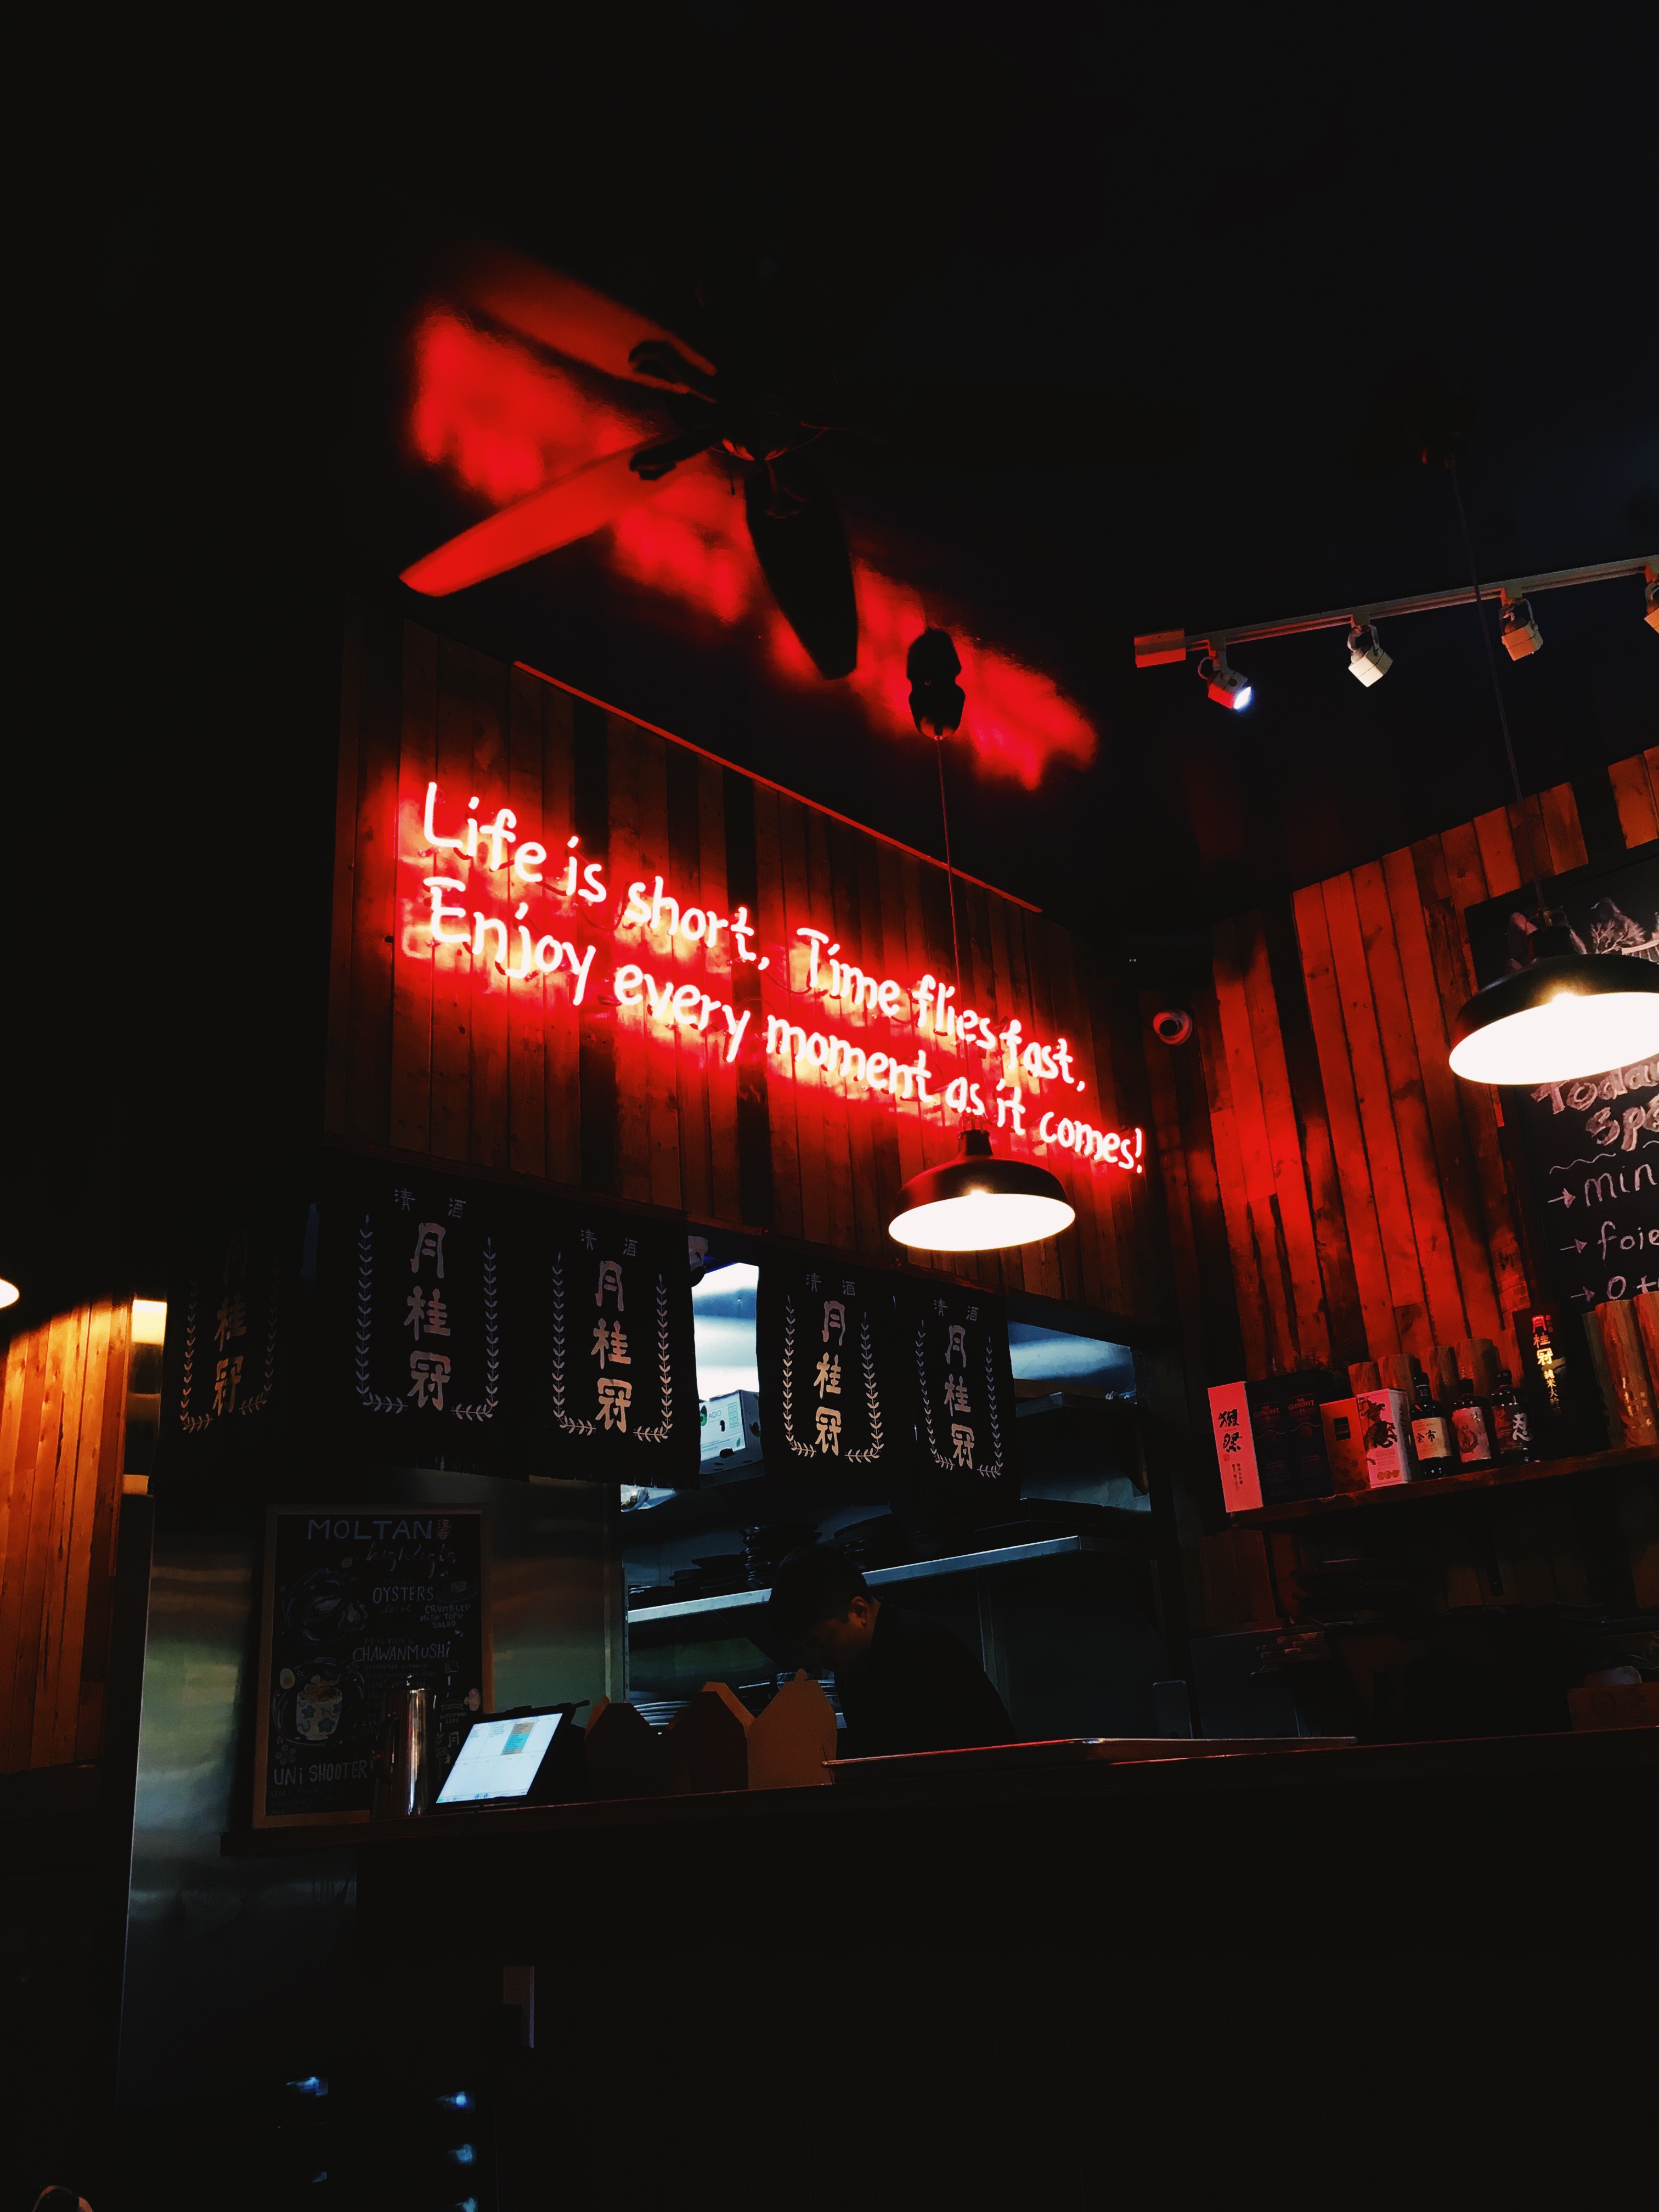 A neon sign in a restaurant that reads 'Life is short. Time flies fast. Enjoy every moment as it comes!'